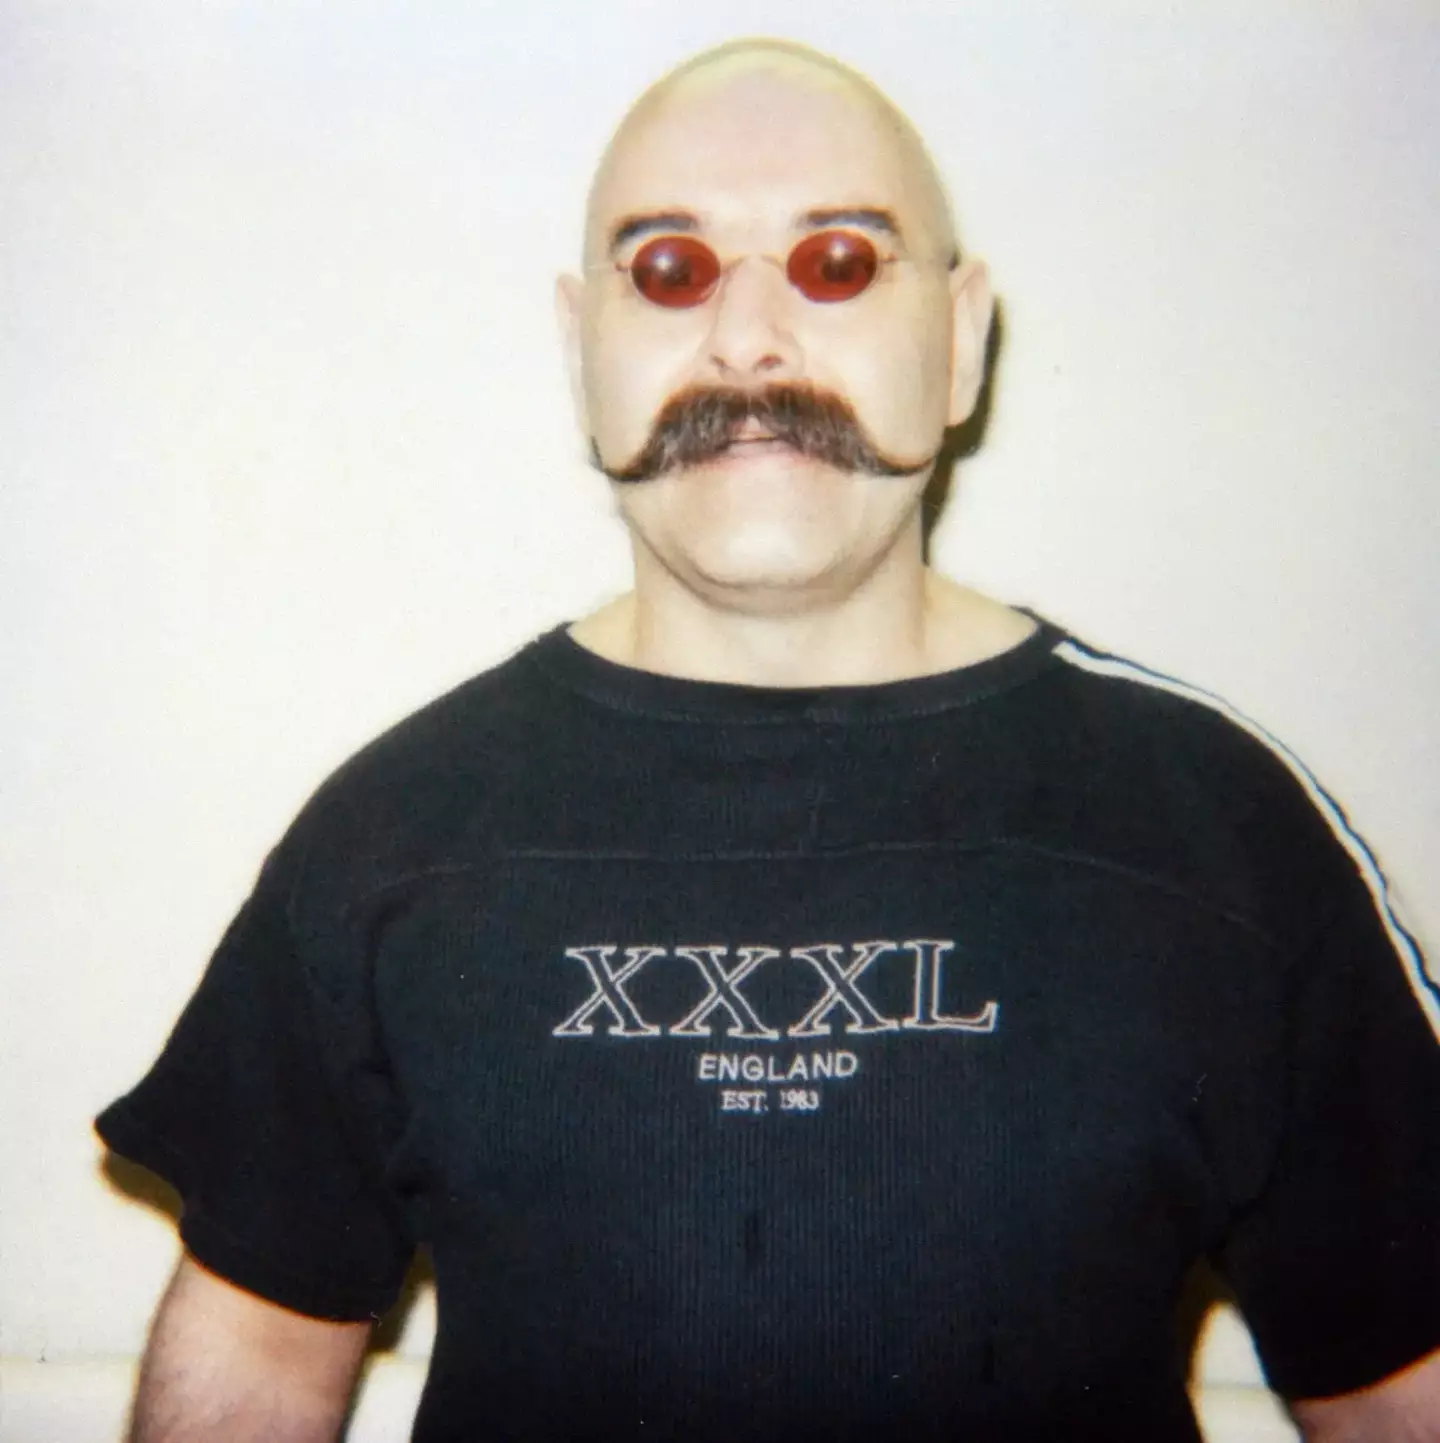 Charles Bronson has said ‘this is my time’ as his potential parole hearing inches closer.